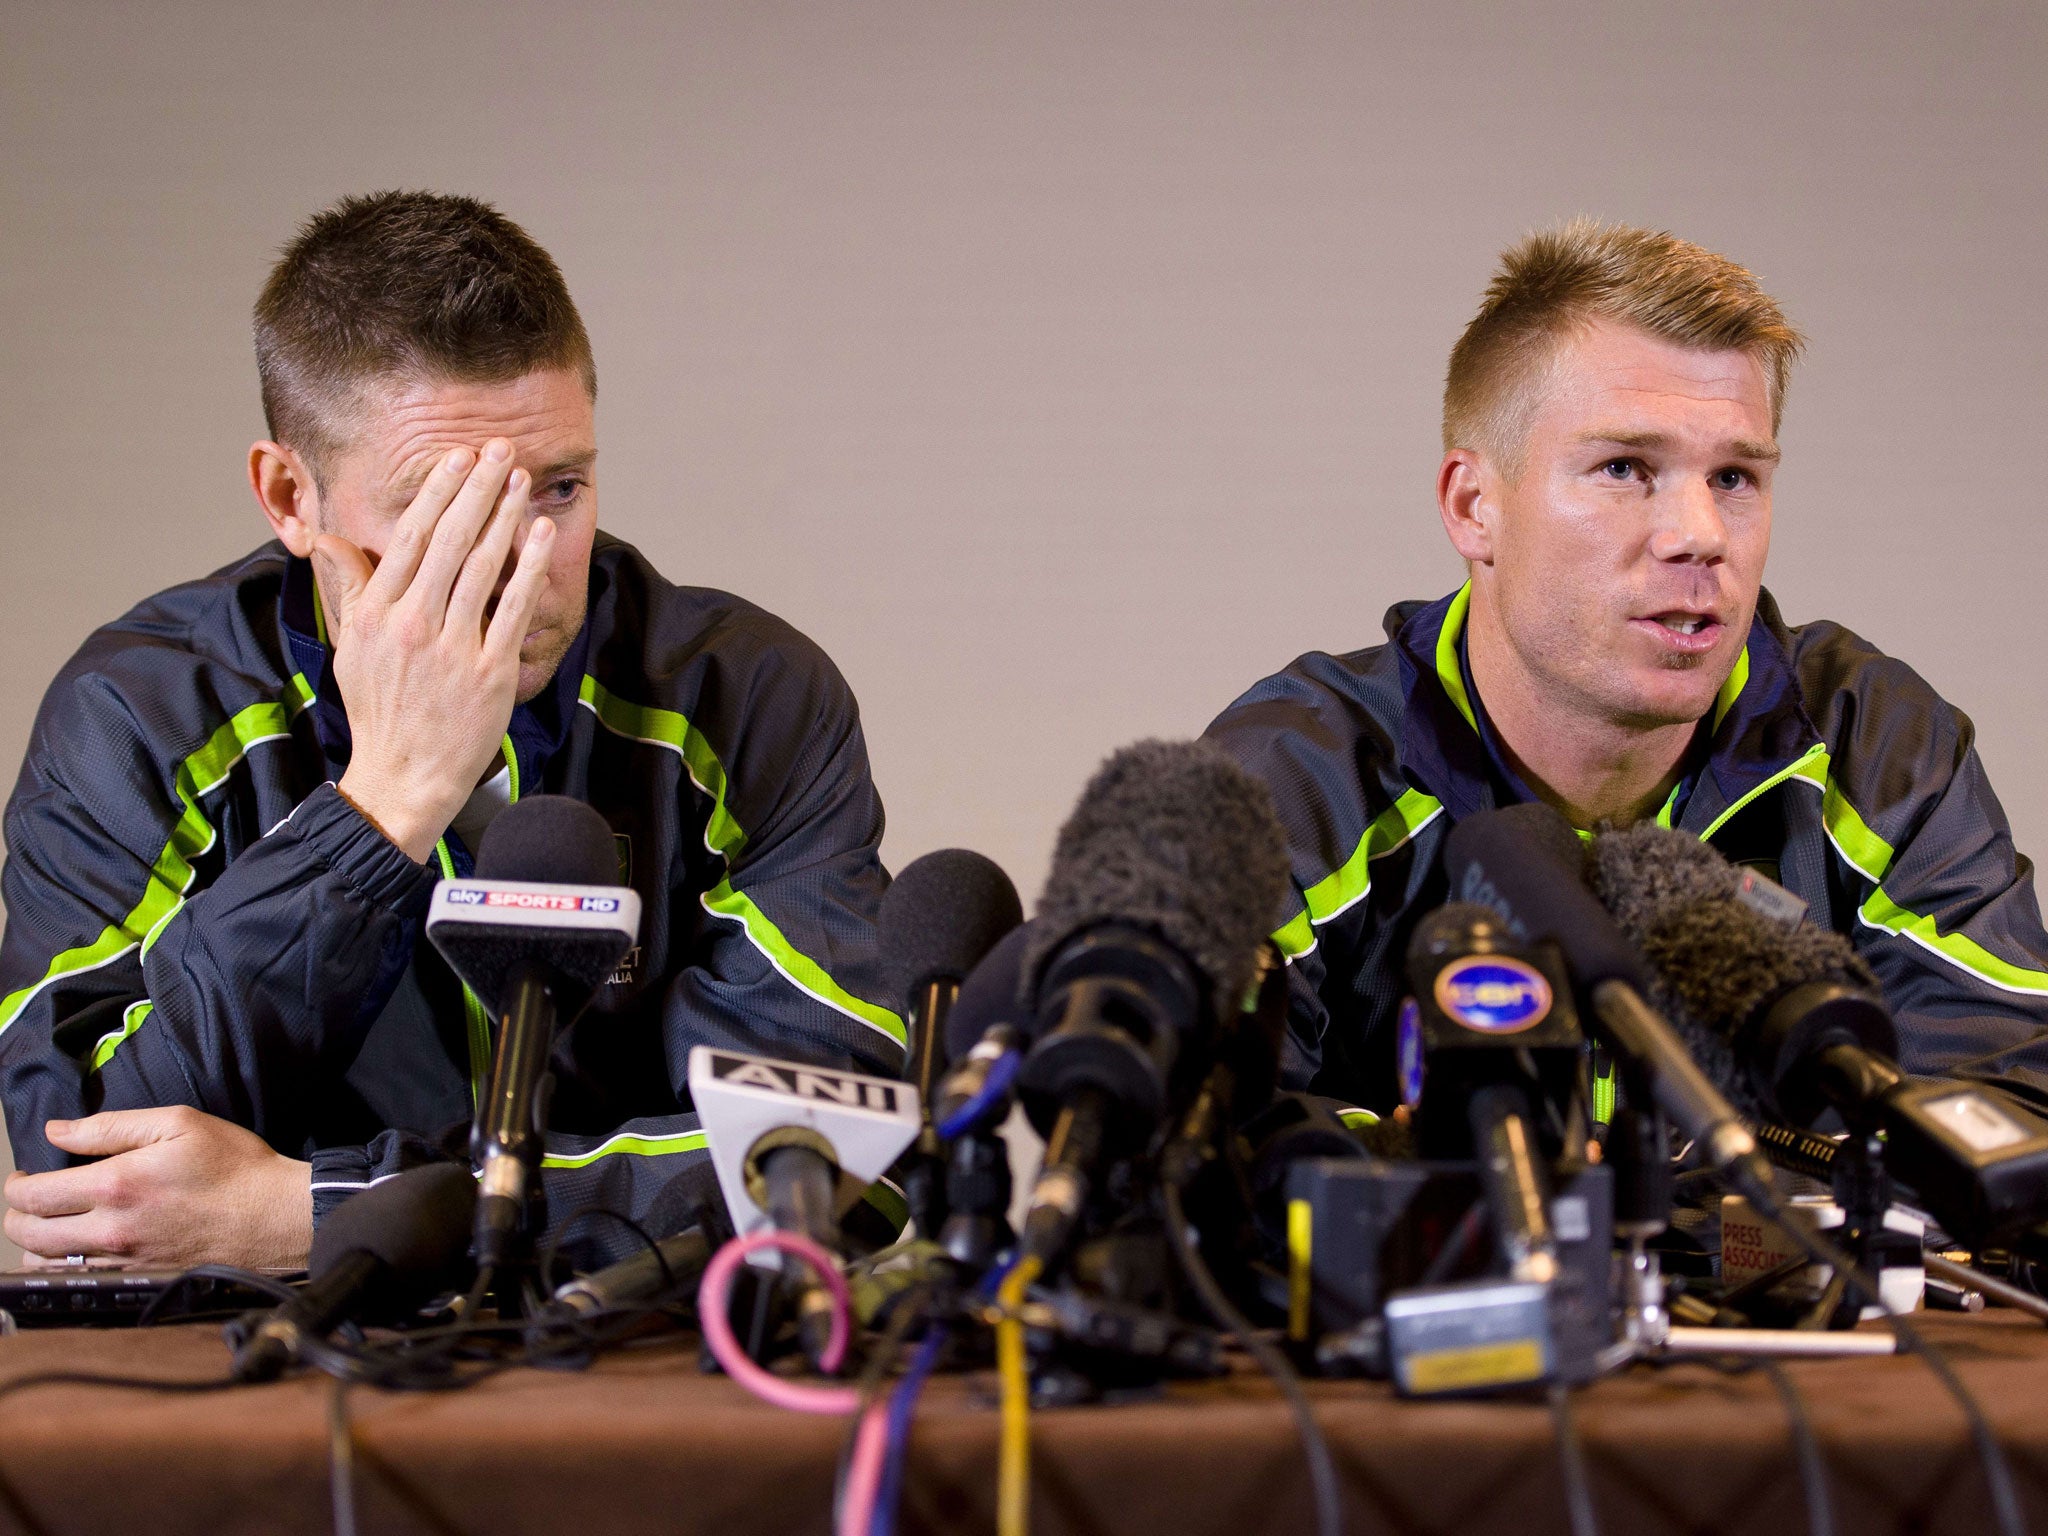 David Warner, right, and Michael Clarke, left, face the media